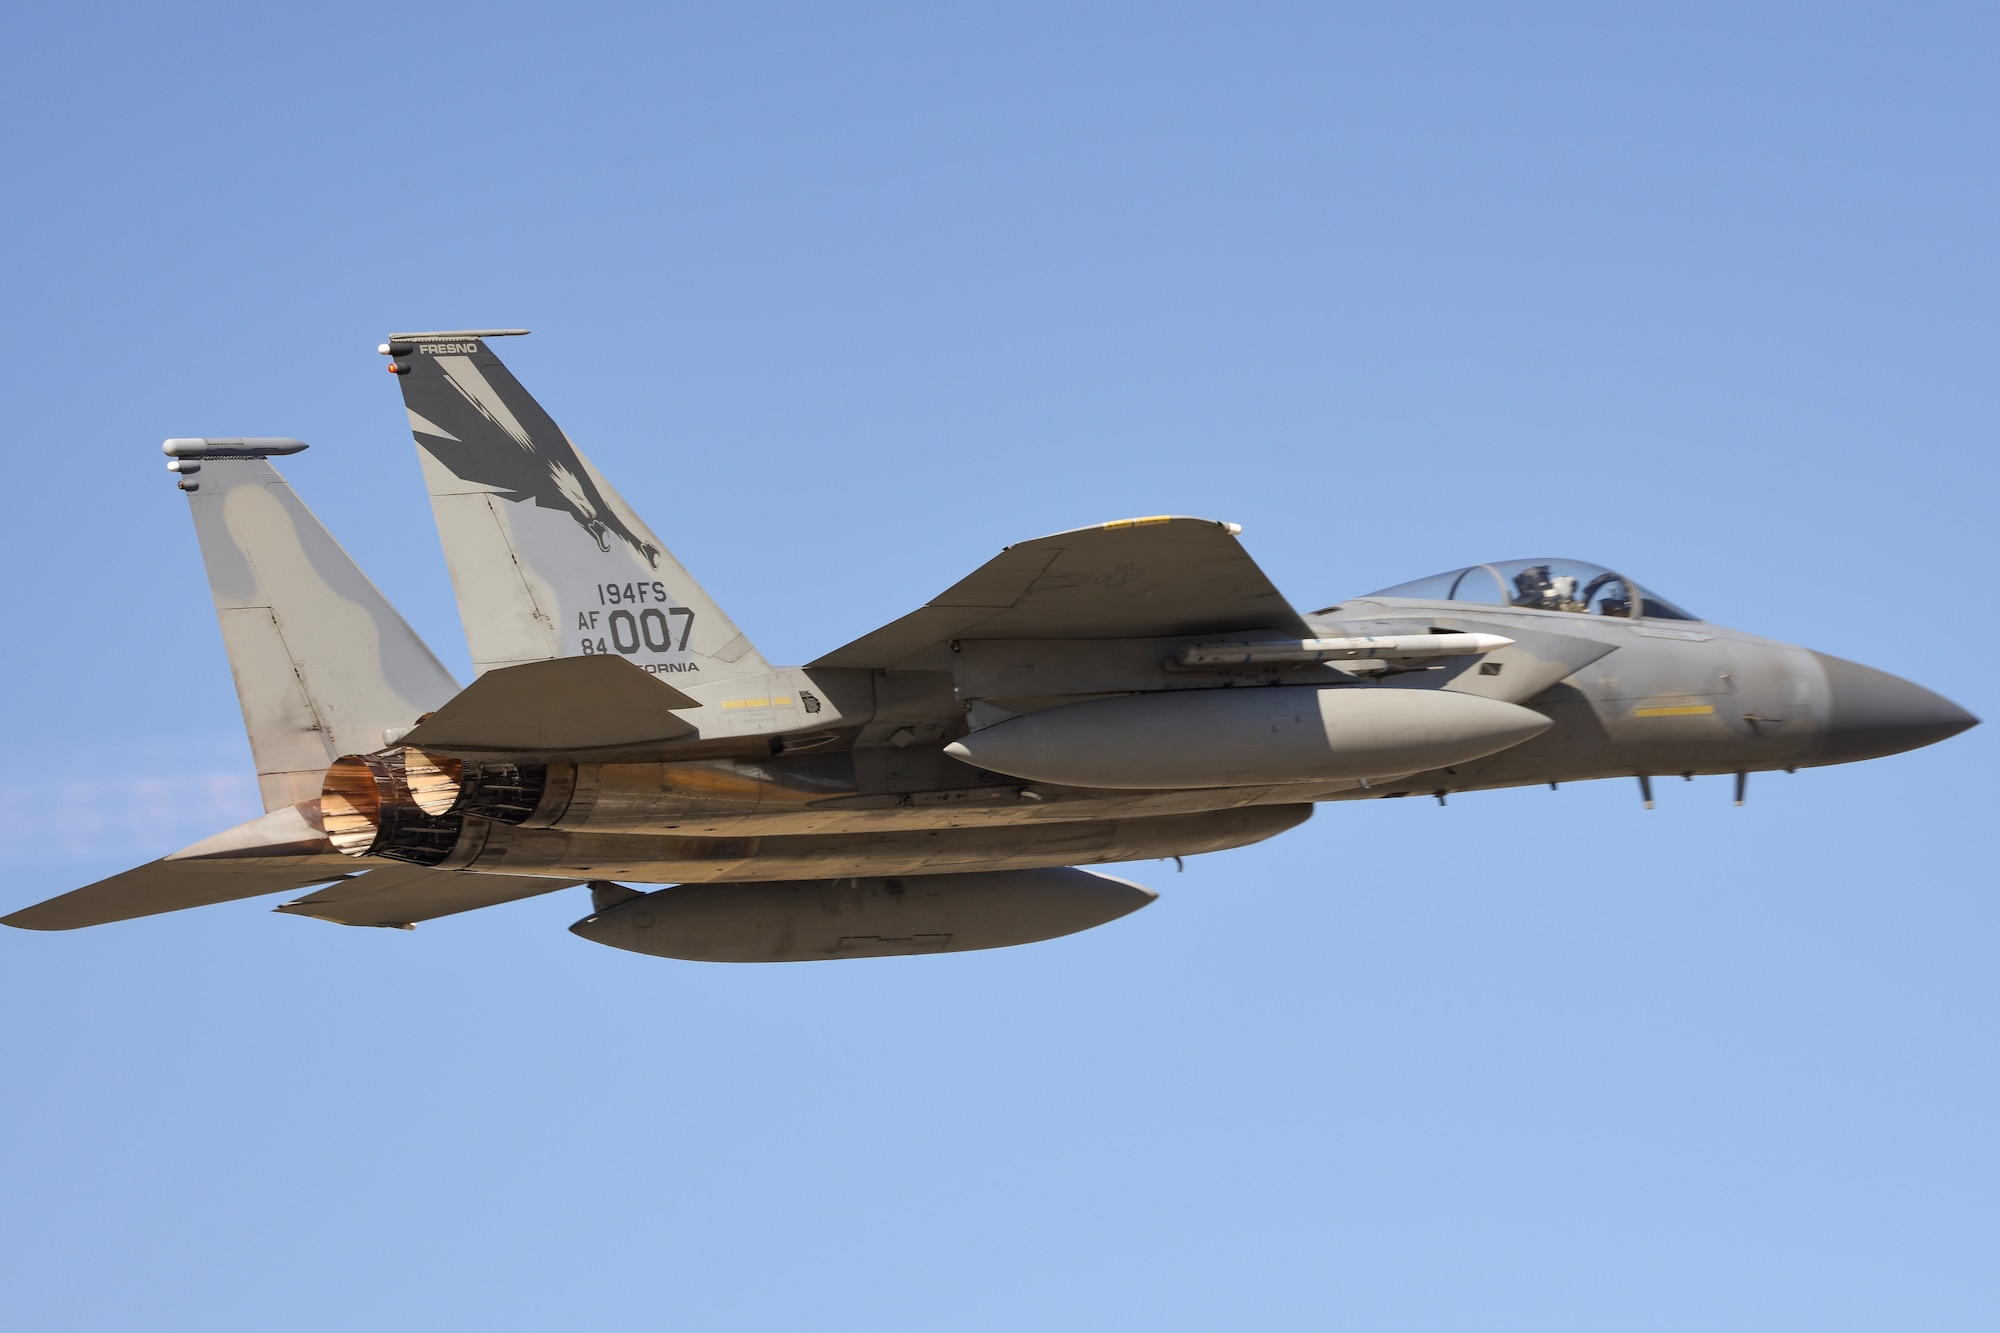 An F-15C Eagle from the 144th Fighter Wing takes off from the Fresno Yosemite International Airport during a clear afternoon, June 26, 2020, to conduct a routine training mission, ensuring pilots maintain required training hours and the Wing maintains mission readiness. (U.S. Air National Guard photo by Capt. Jason Sanchez)